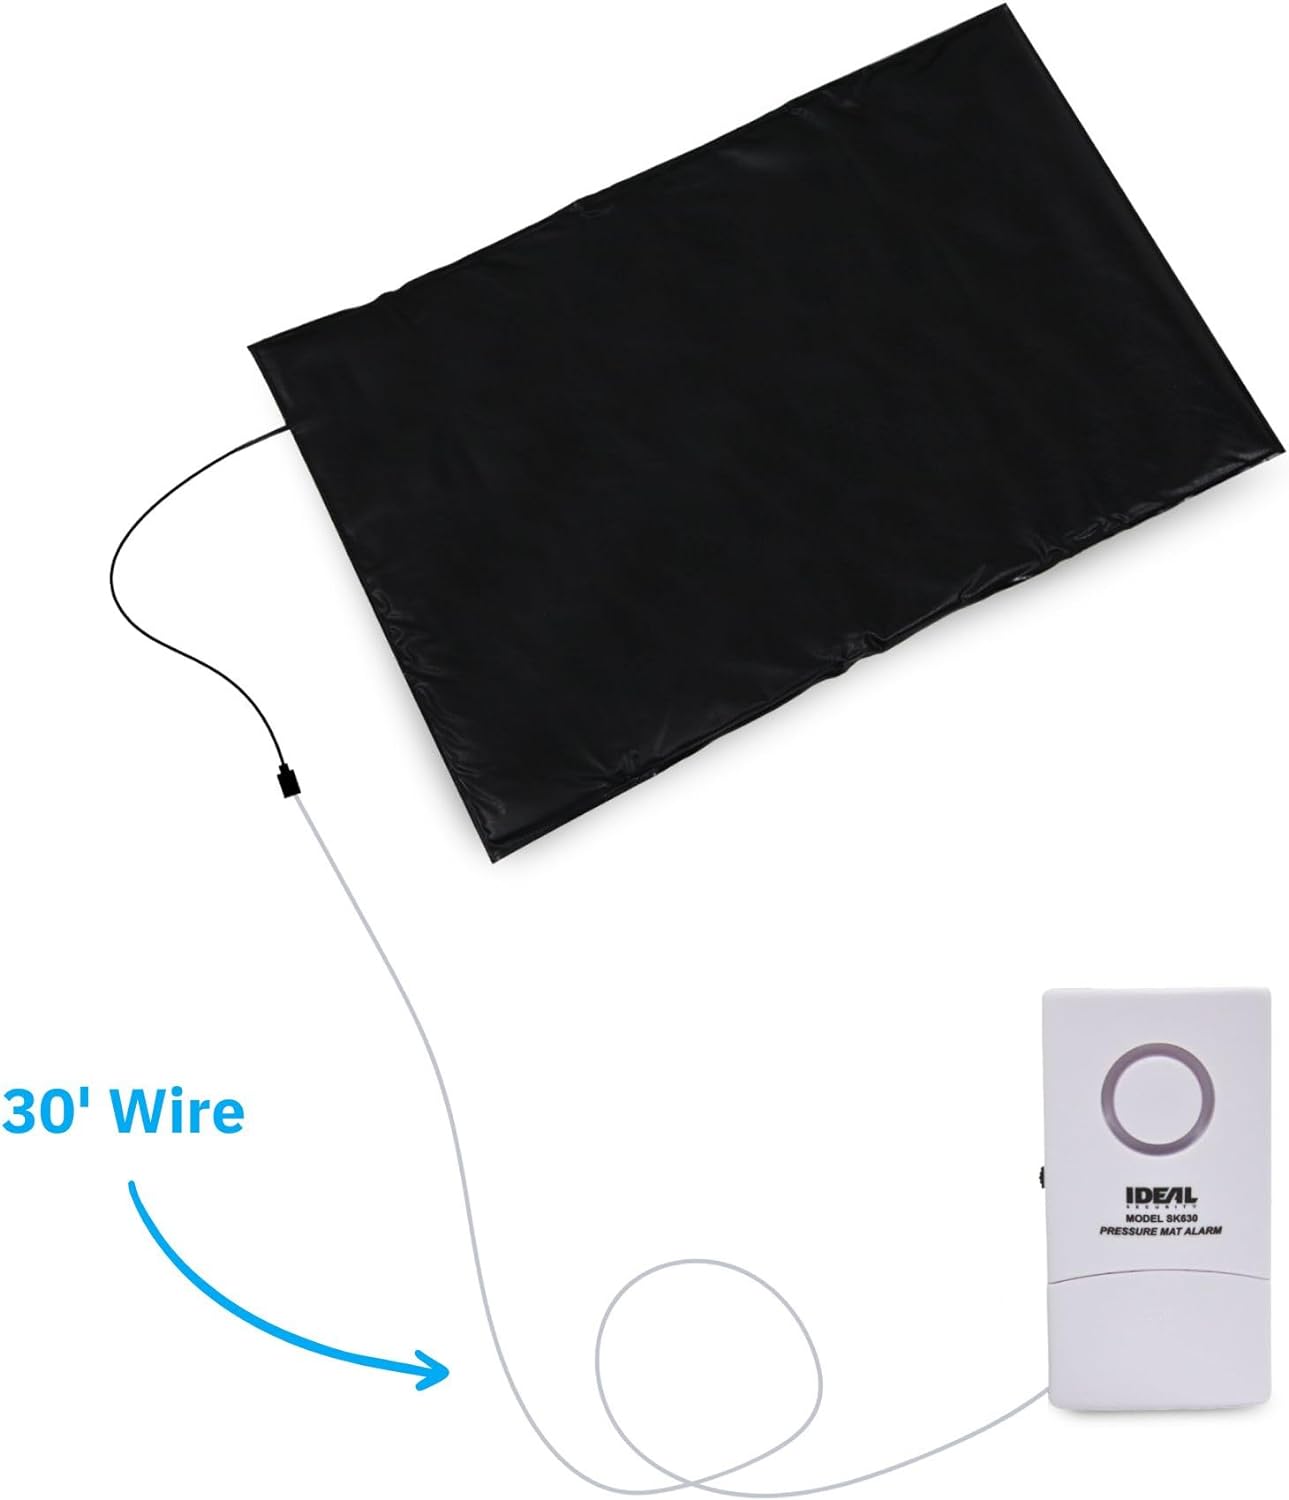 pressure sensitive mat alarm for caregivers. Shown with a 30' wire.